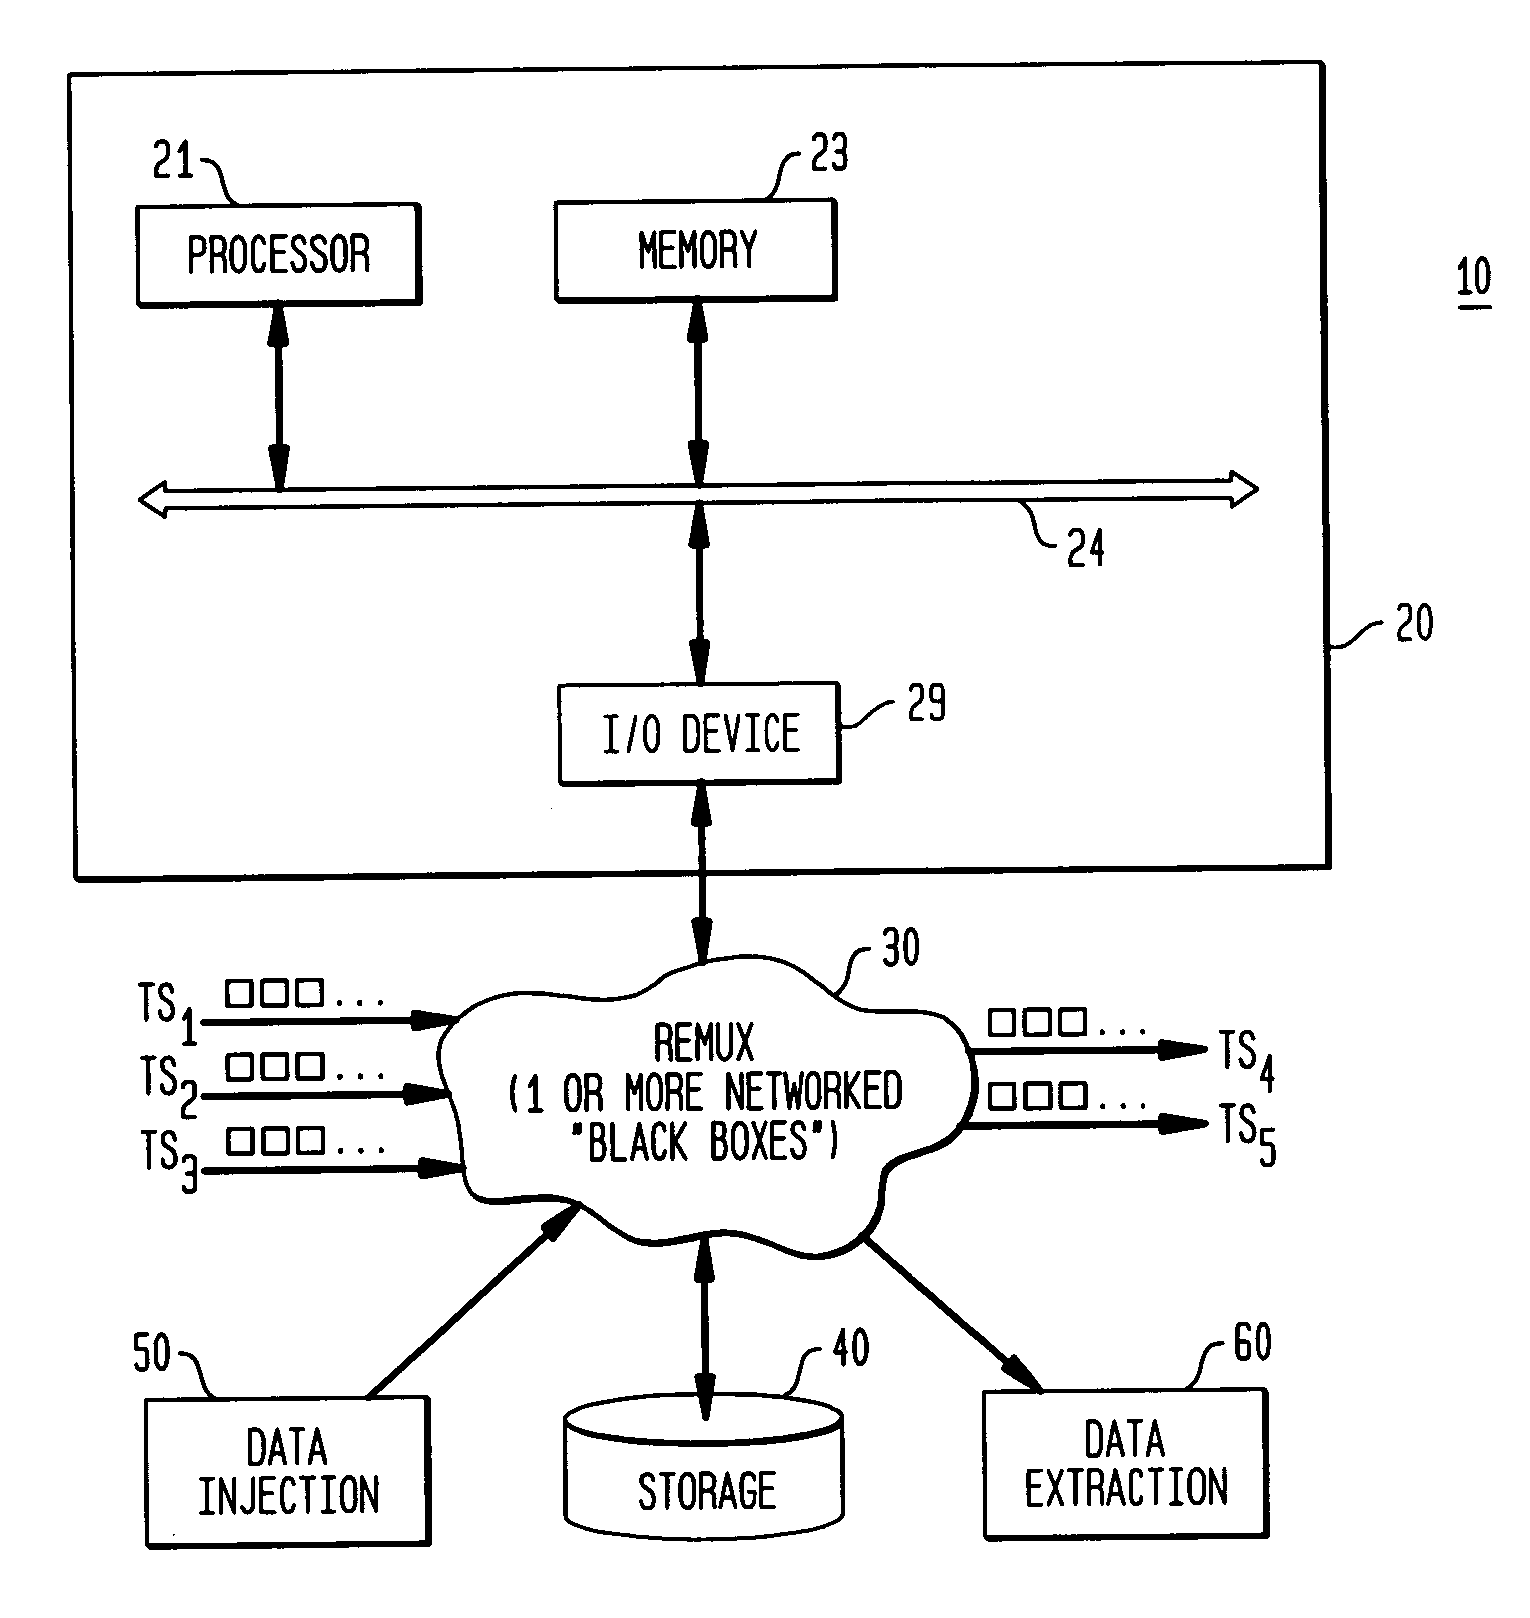 Apparatus for redundant multiplexing and remultiplexing of program streams and best effort data